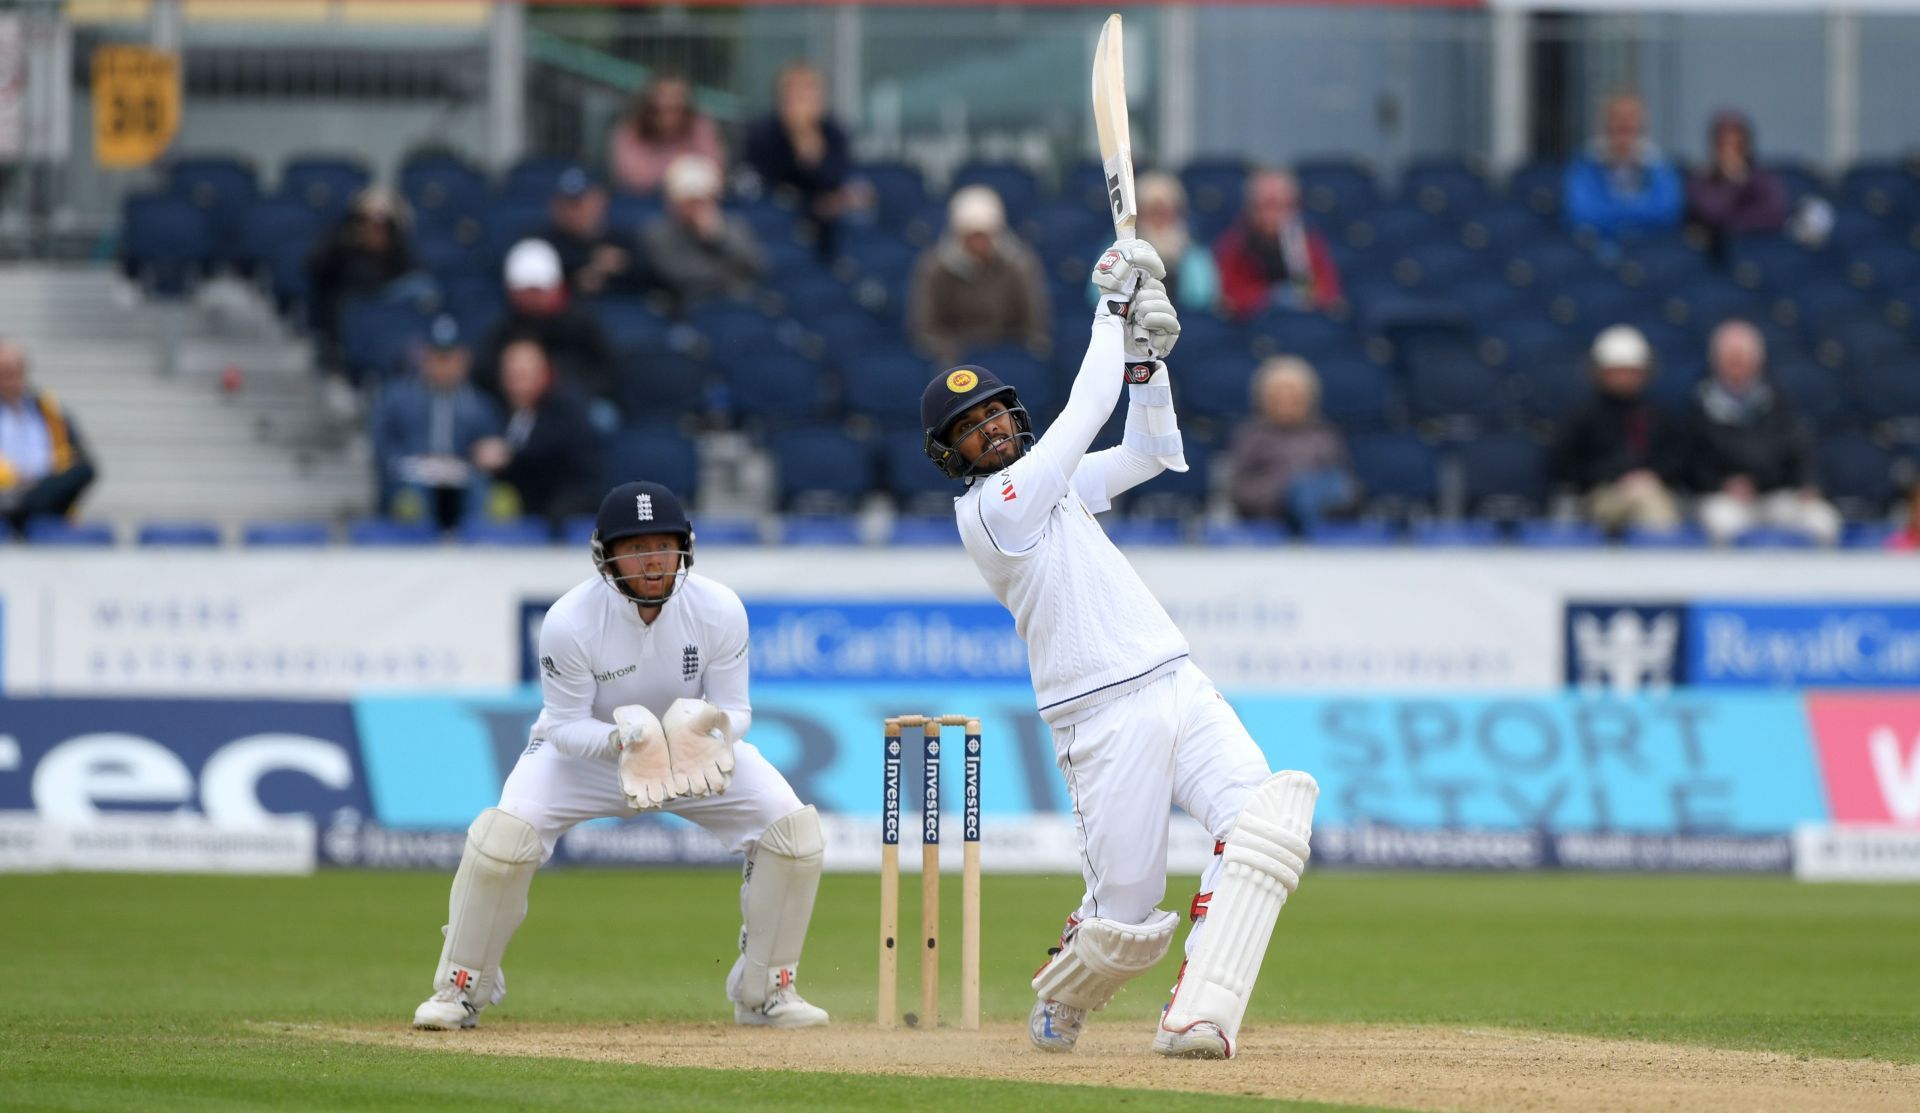 Dinesh Chandimal has been in a rich vein of form